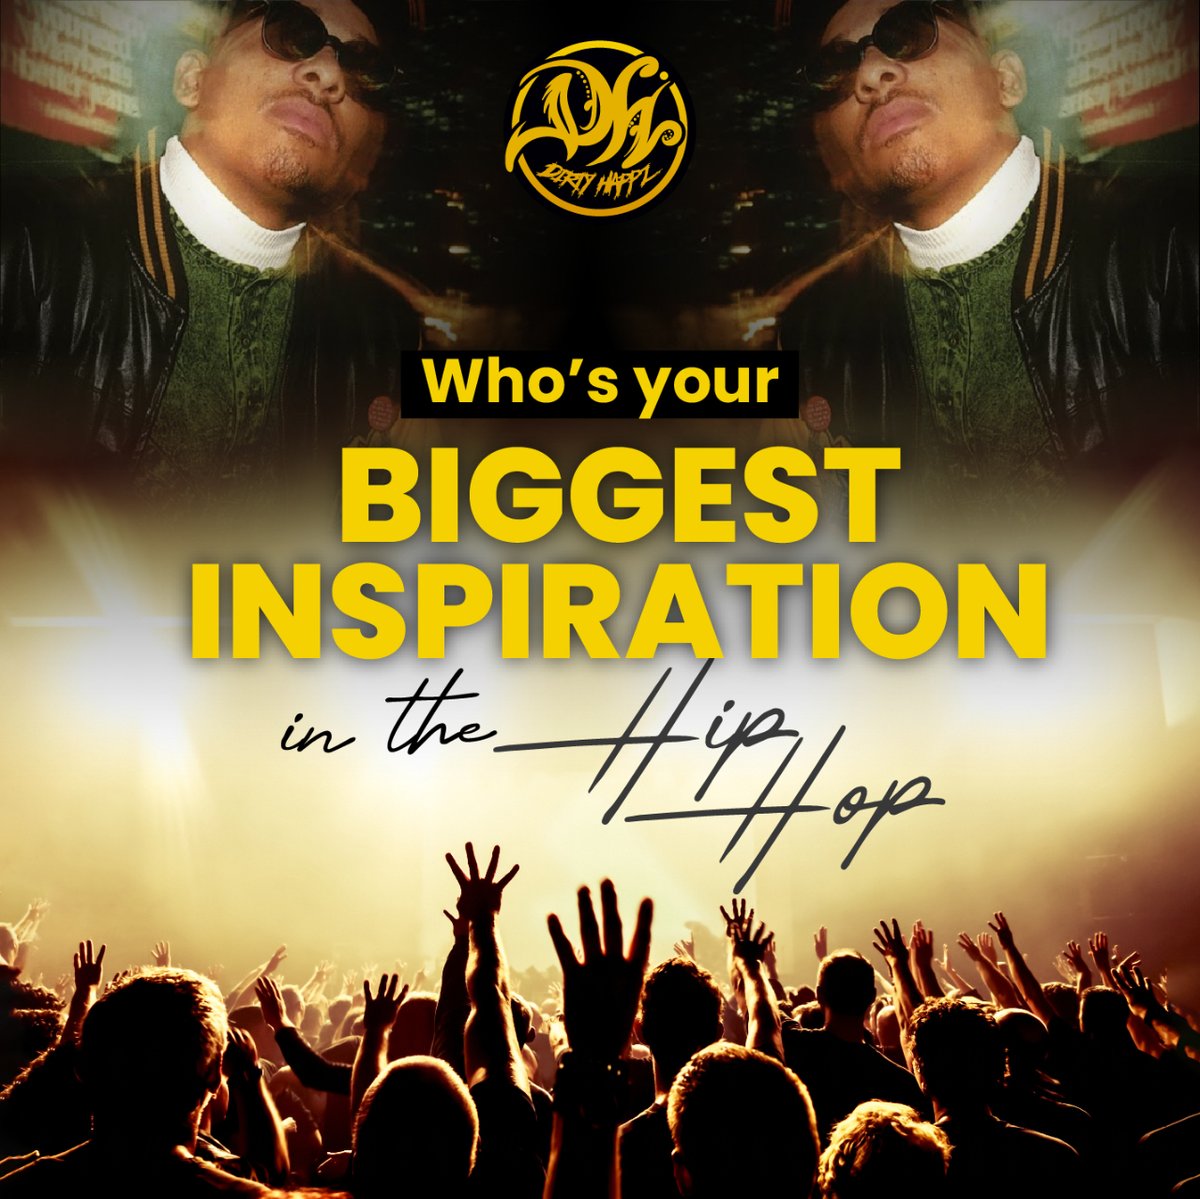 Who's your biggest inspiration in the hip hop game? For me, it was always @thegodkingsun05
 #KINGSUN , #RAKIM #RUNDMC #CYPRESSHILL #BIGPUN #WUTANG #PSYCHOREALM #CASSIDY #NAS #EMINEM #NWA #EPMD #2PAC #BIGGIE #NIPSEY 
  Drop your favorites in the comments! #Dirtyhappz